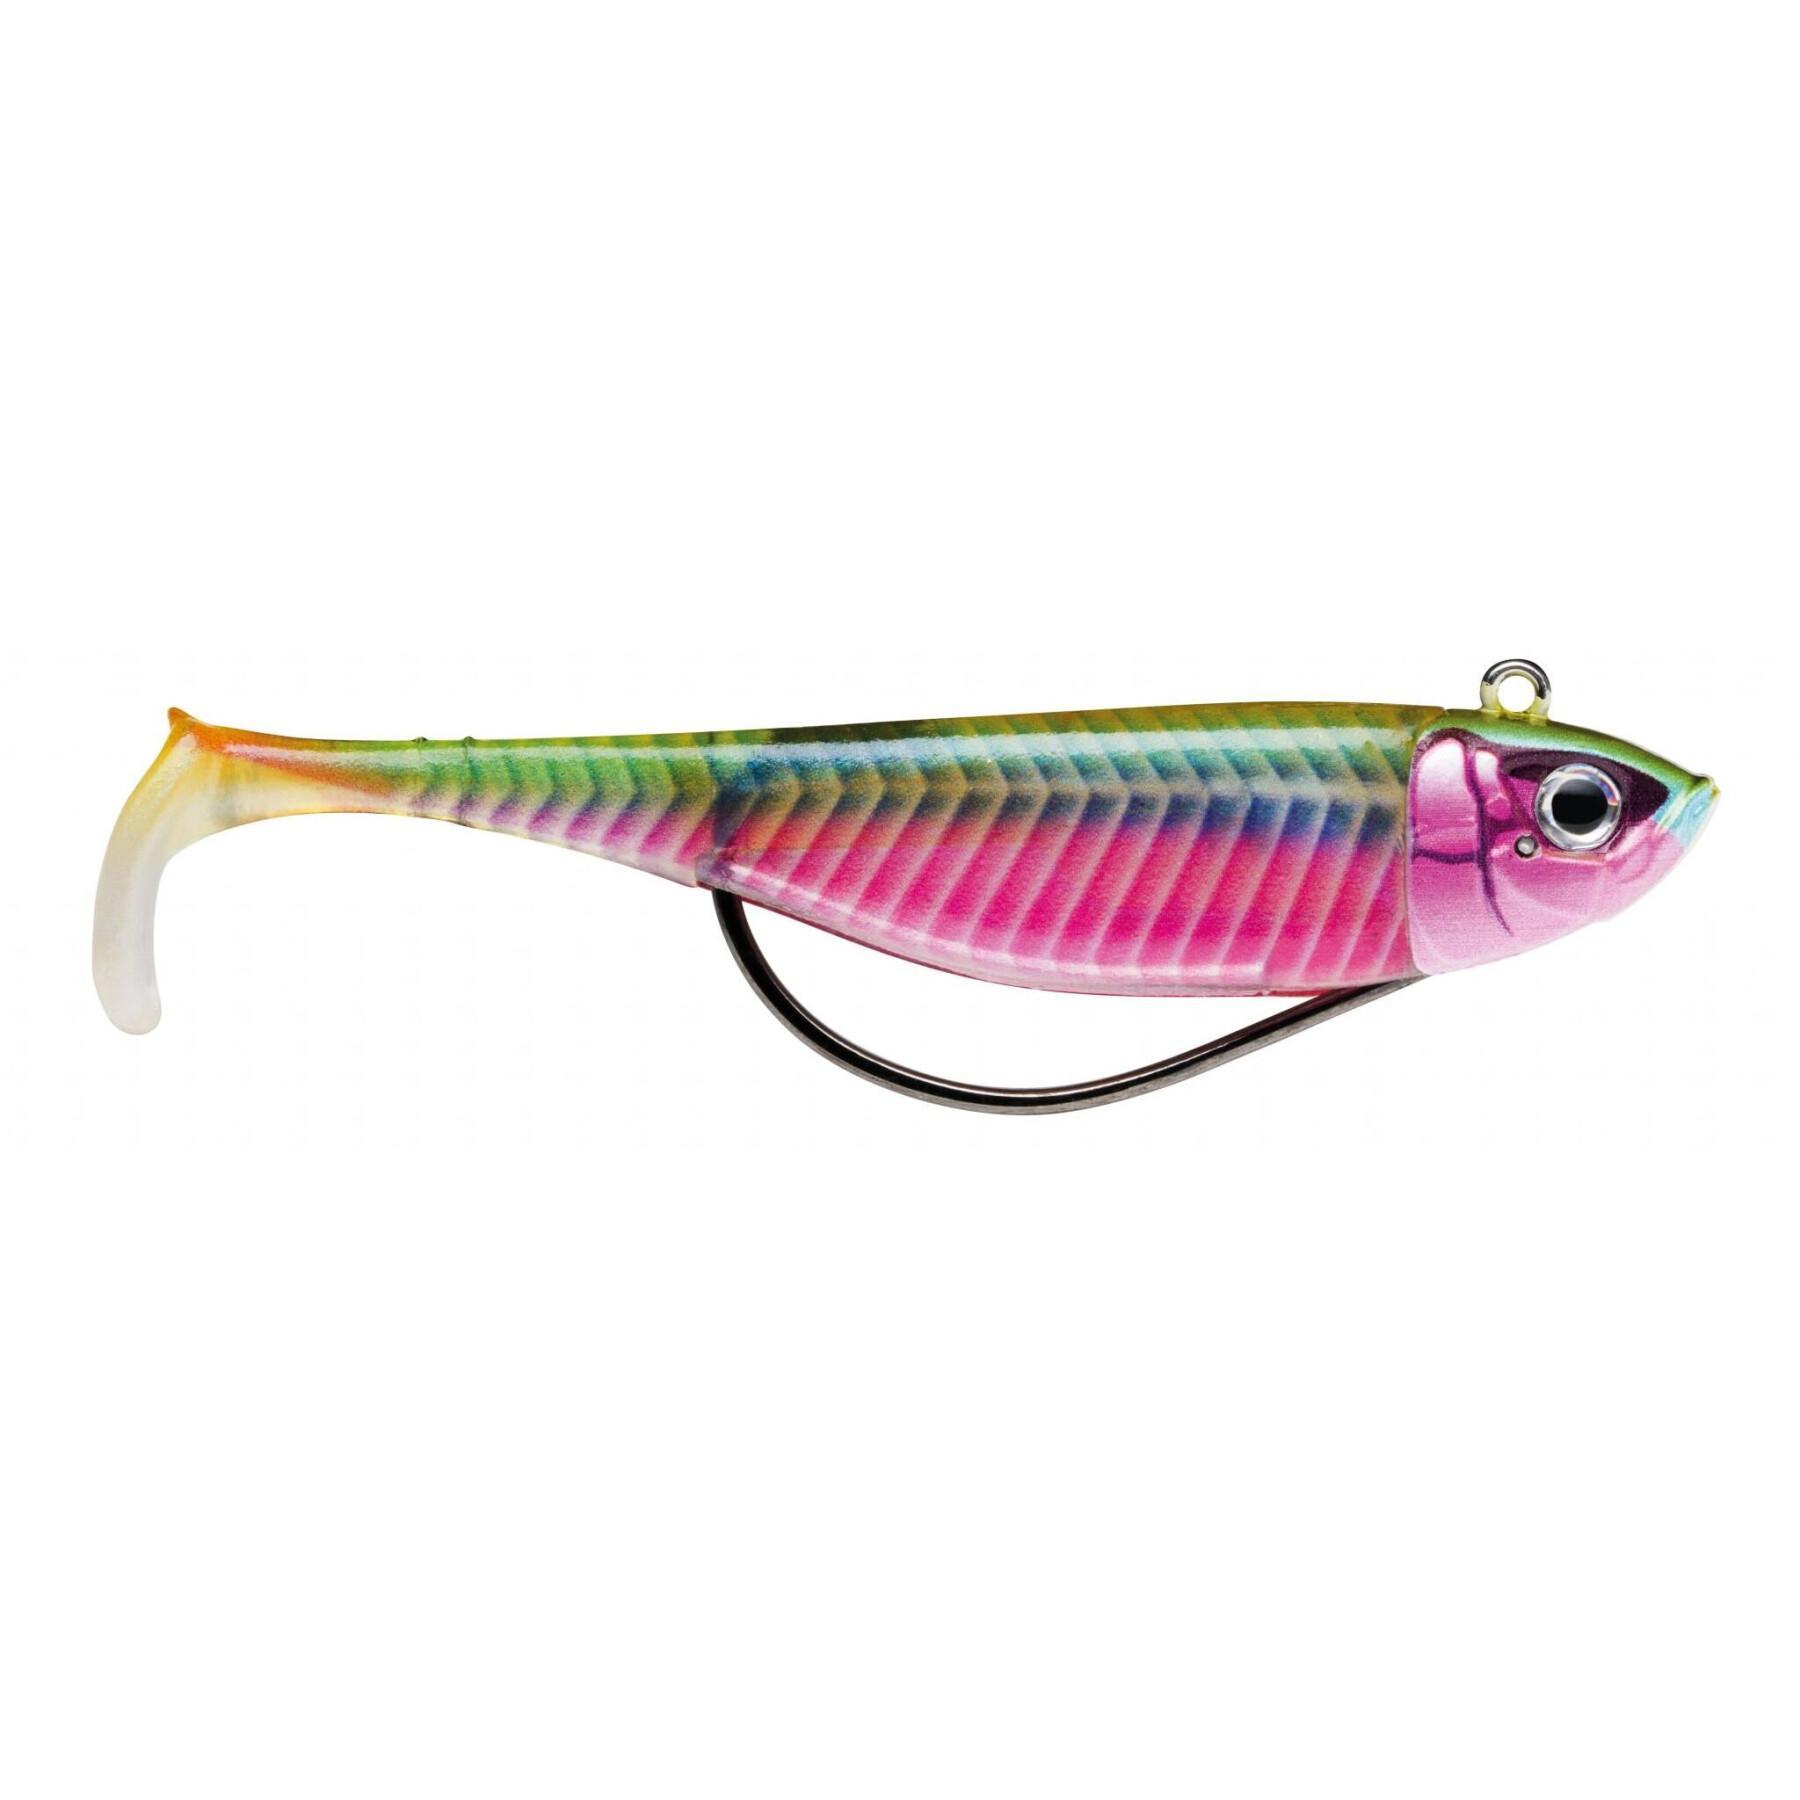 Engodos Storm Biscay Shad – 19g (x2)